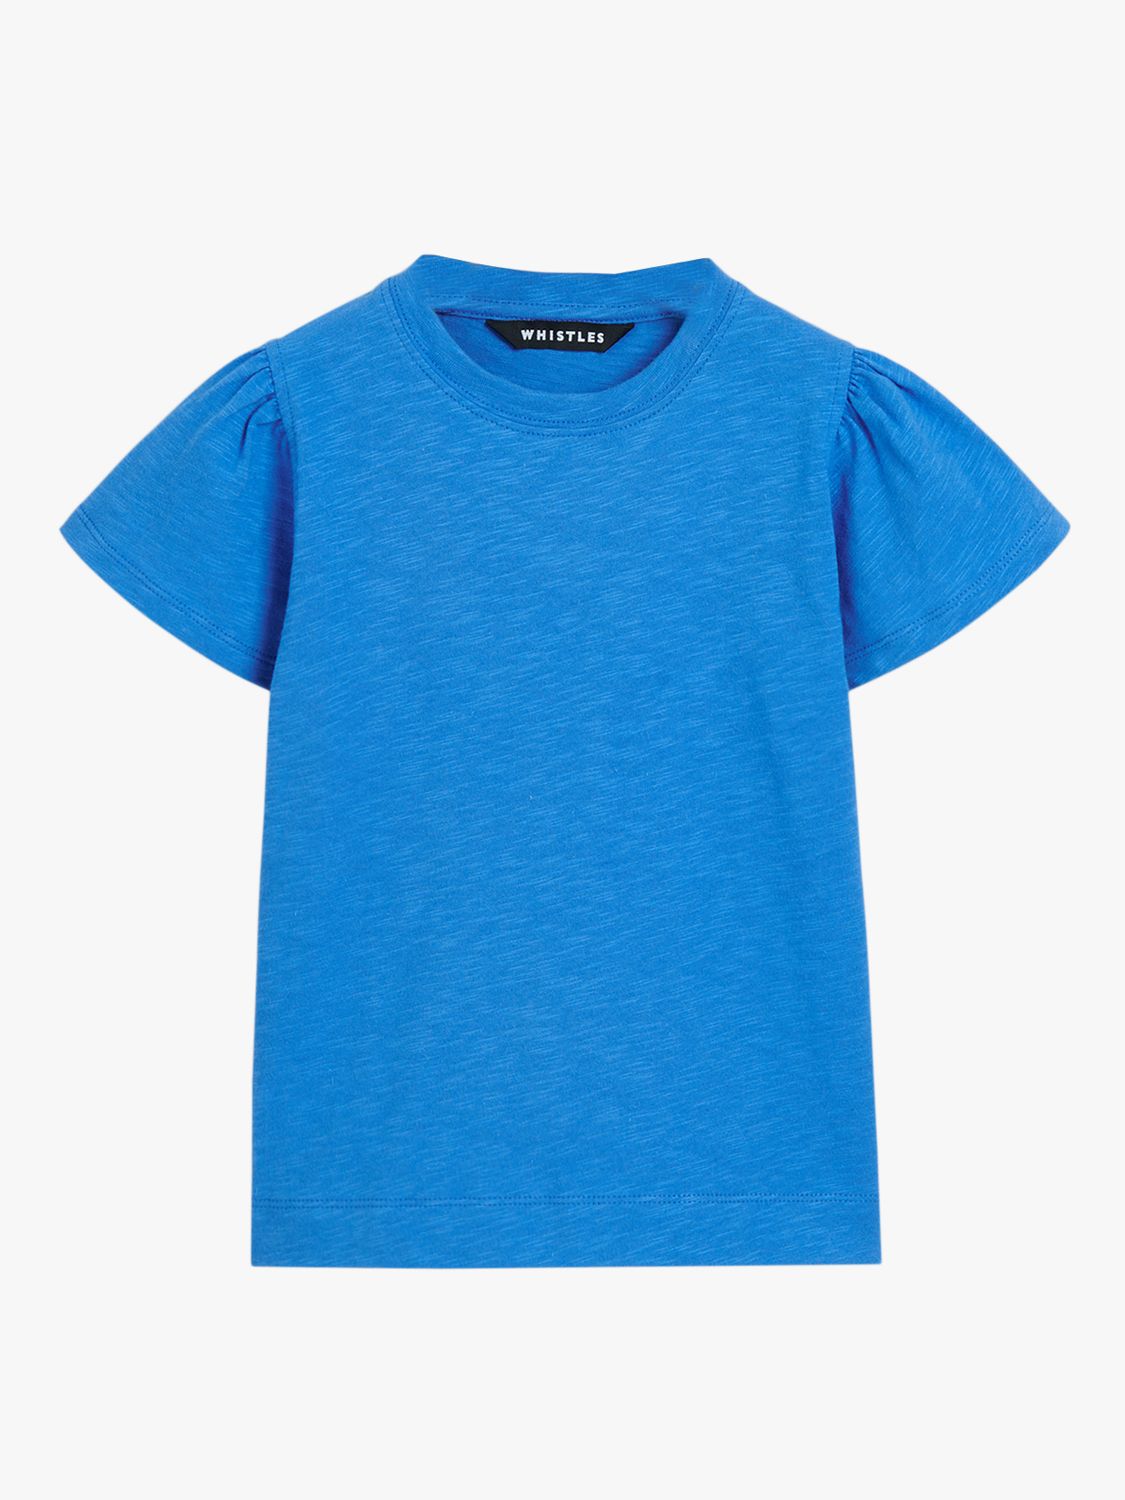 Whistles Kids' Frill Sleeve Plain Top, Blue, 3-4 years